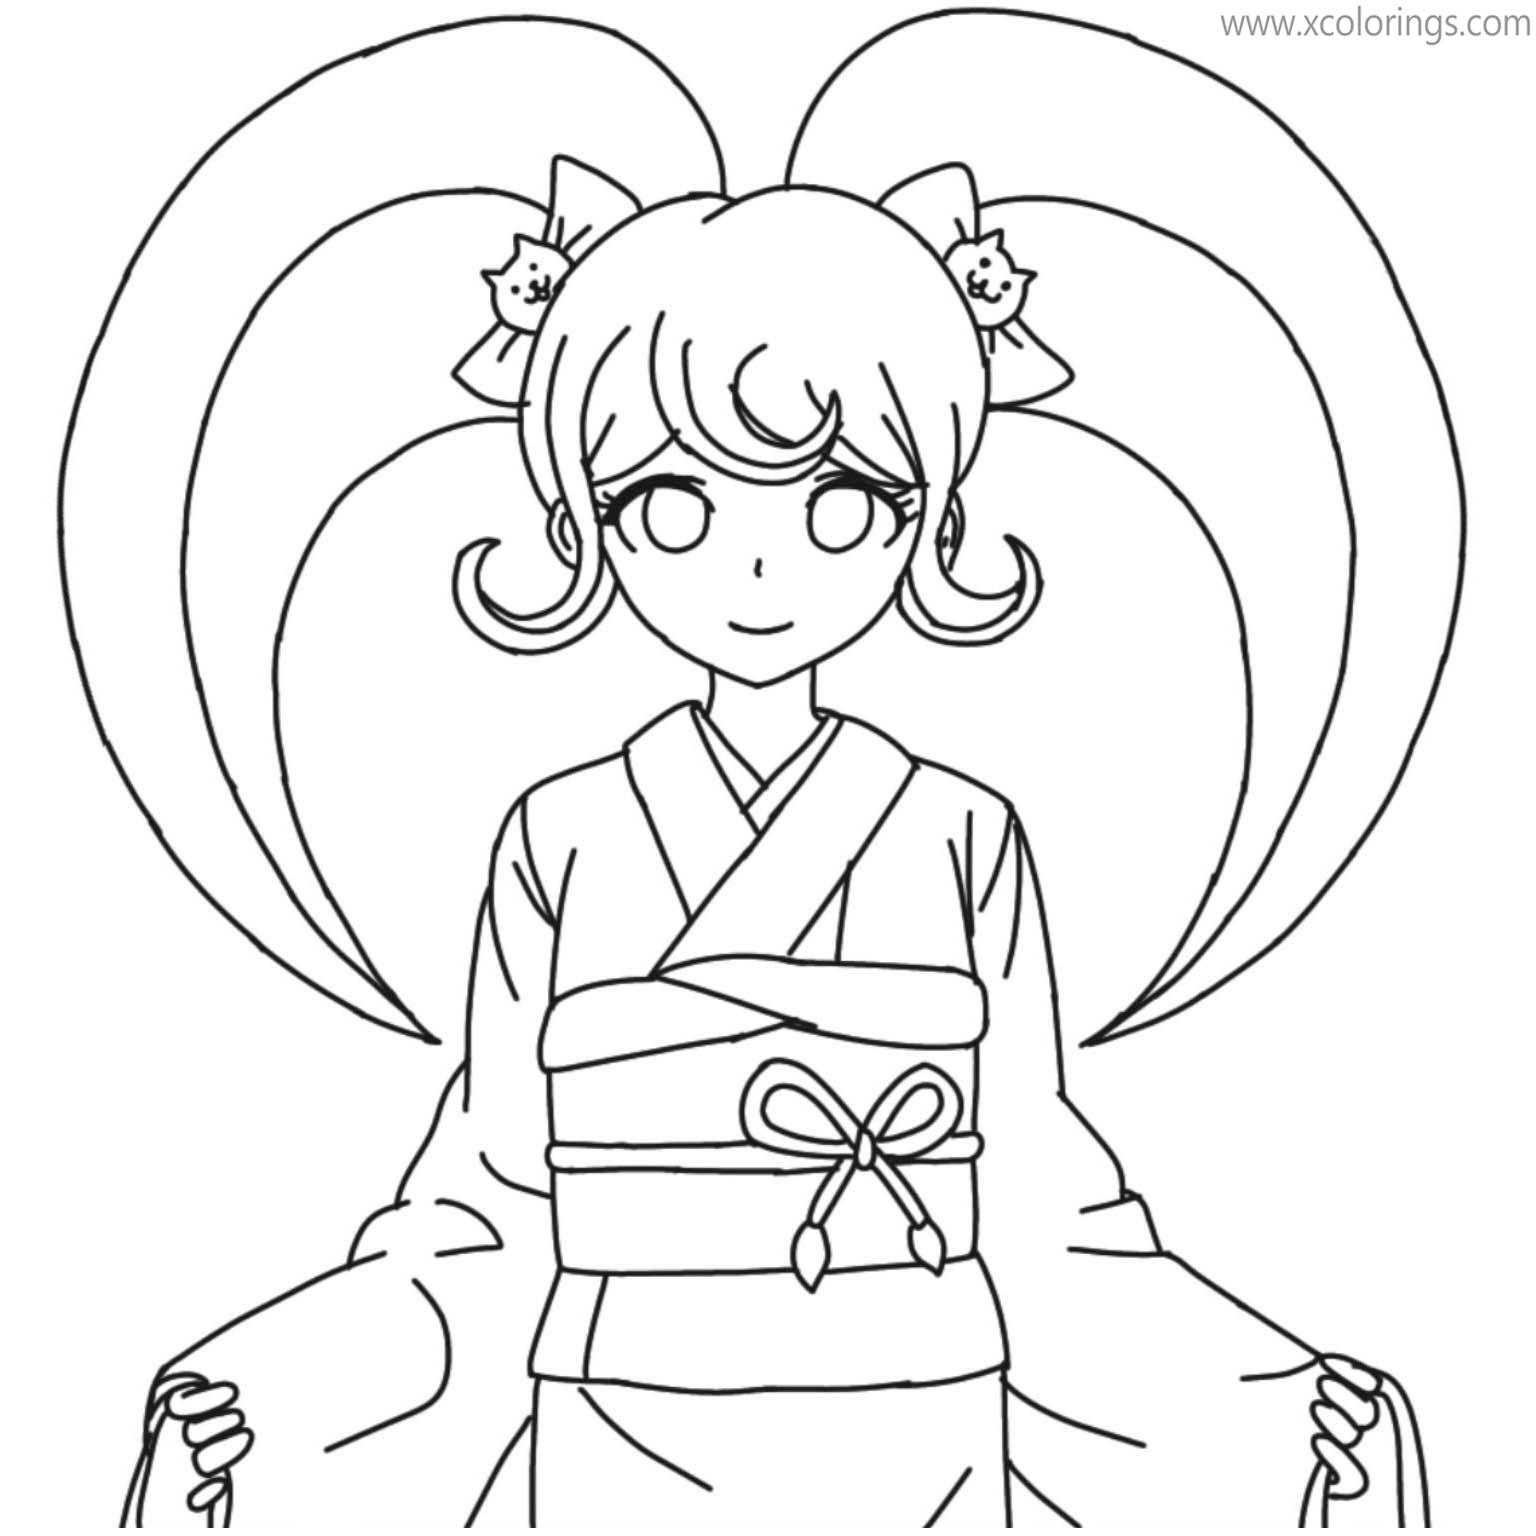 Danganronpa Coloring Pages Hiyoko Fanart by Laney the queen